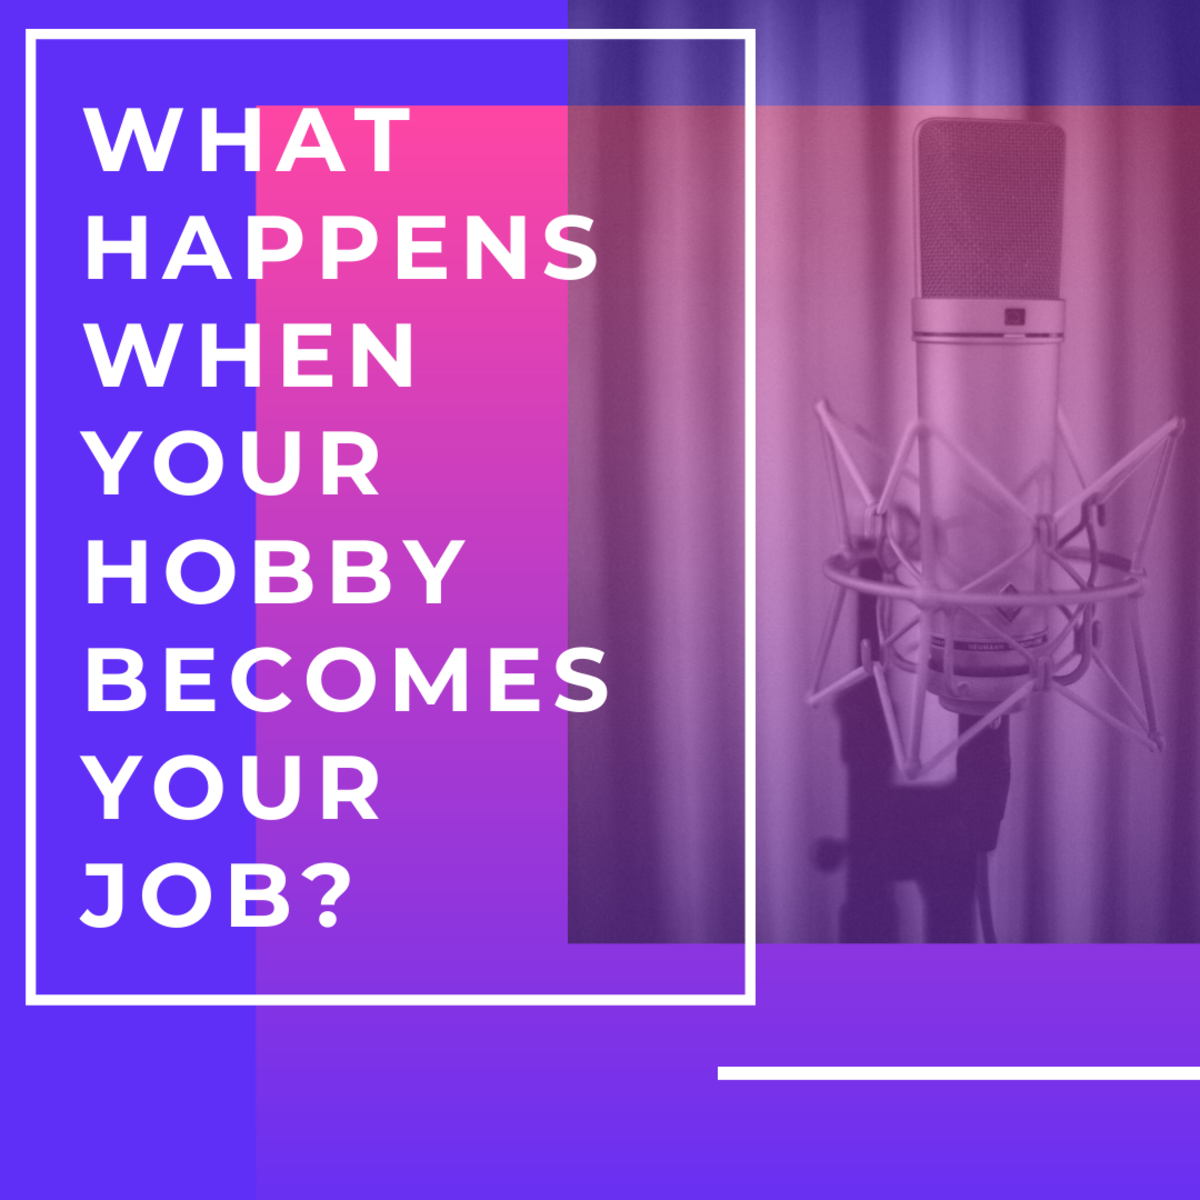 5 Things That Happen When Your Hobby Becomes Your Job